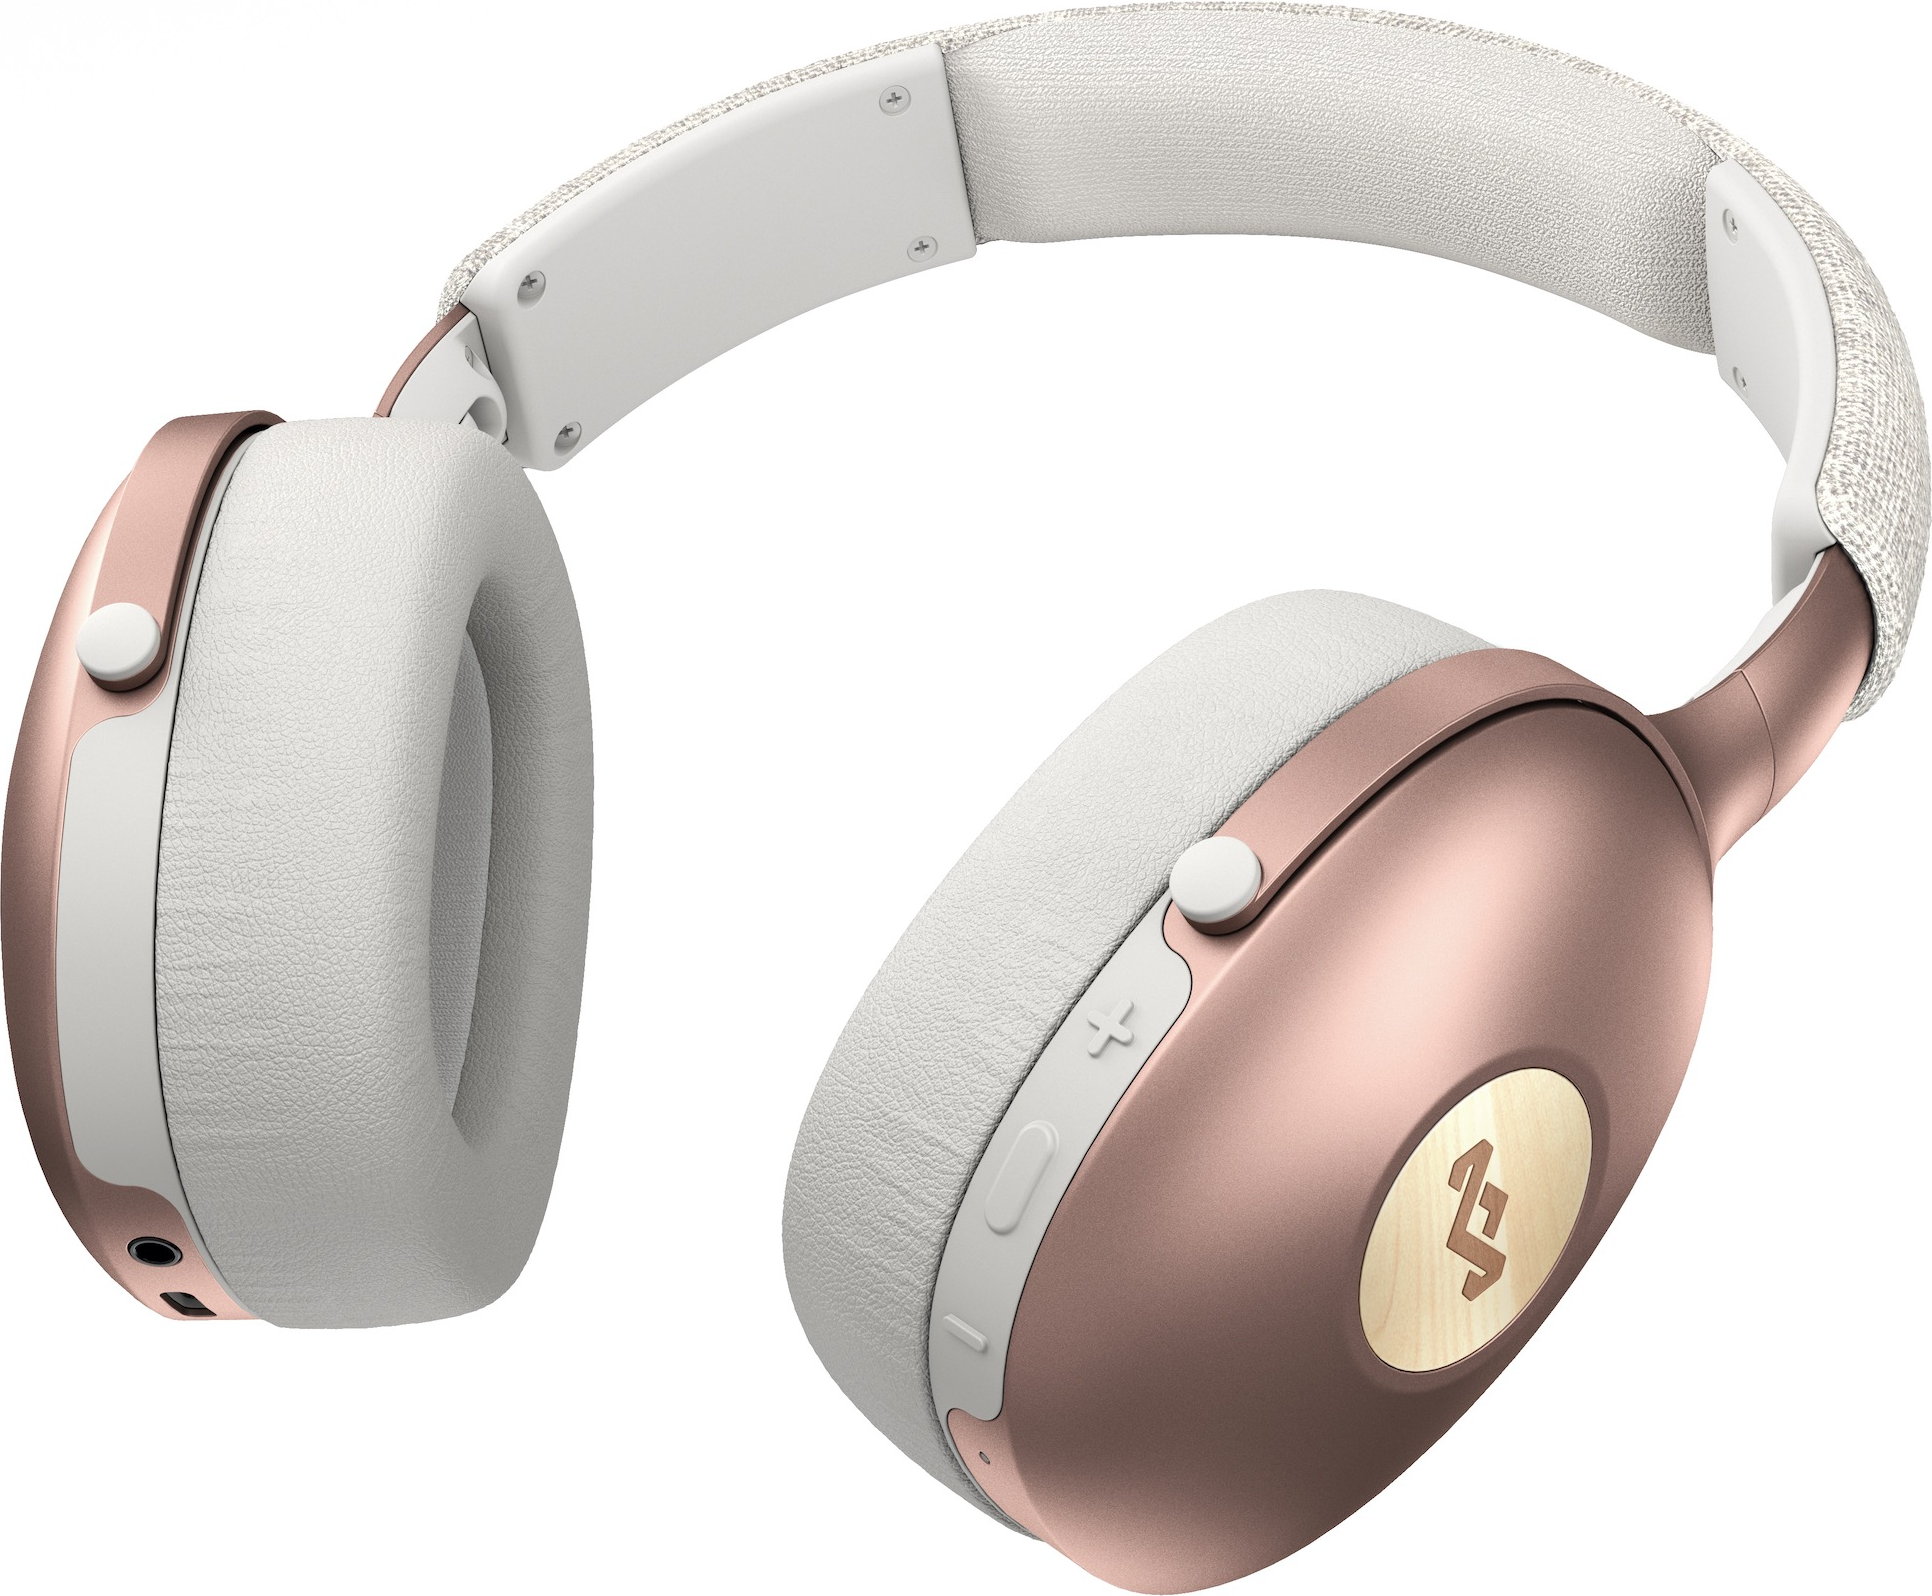 HOUSE OF MARLEY Positive Vibration XL - Auricolare Bluetooth (Over-ear, Copper)